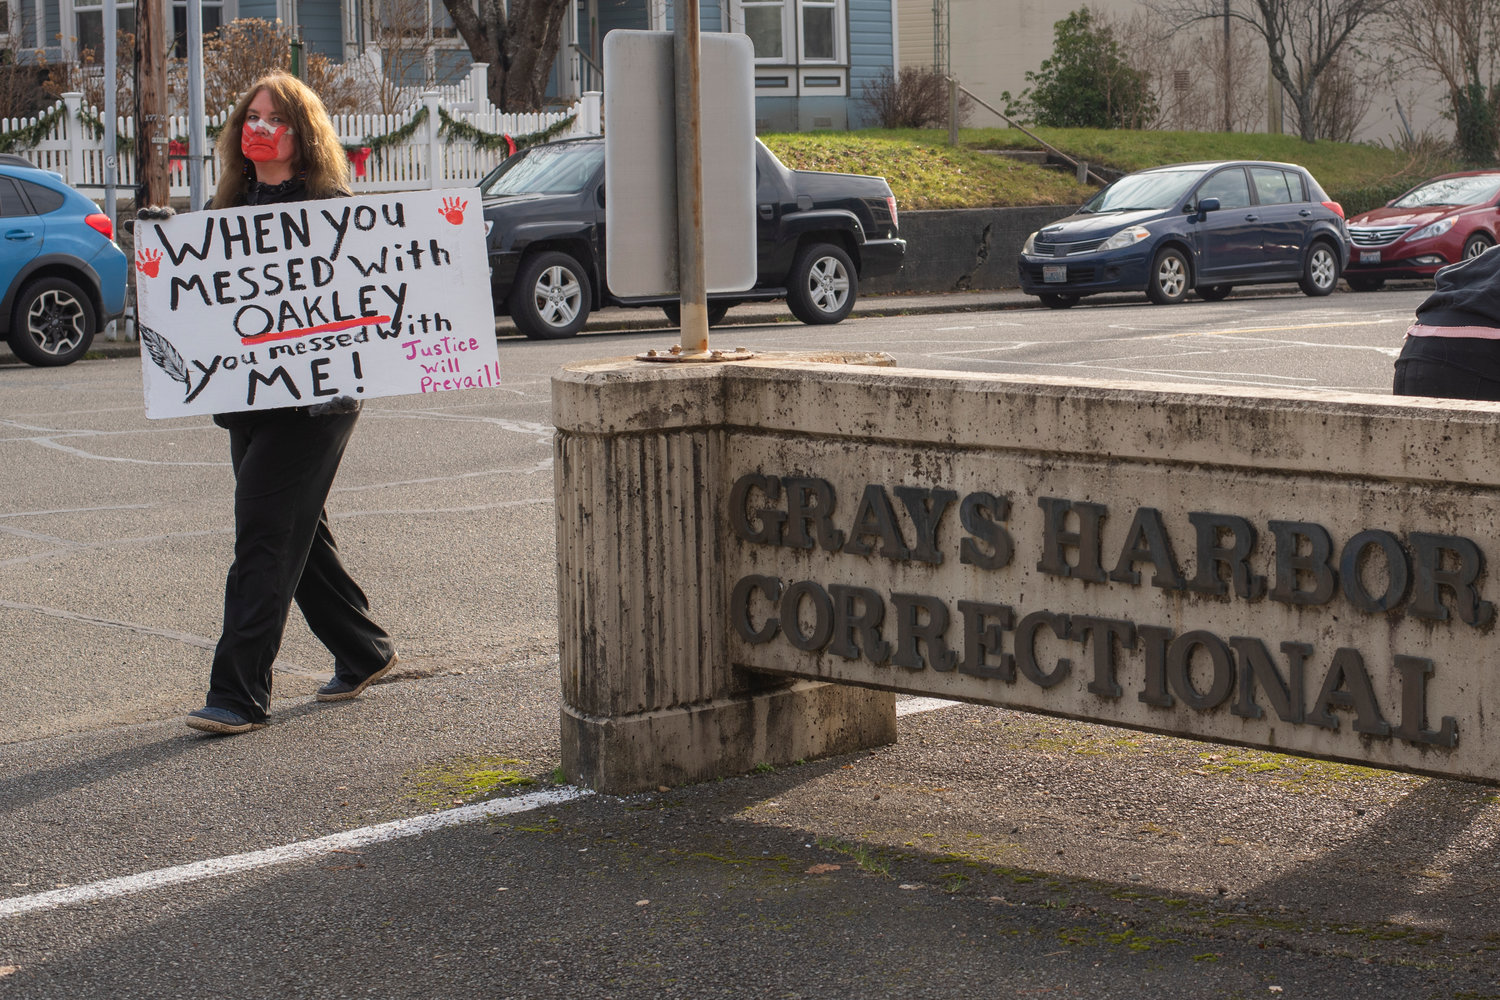 Cherie Roberts, Oakley’s foster grandmother, walks around the Grays Harbor County Correctional Facility holding a sign Saturday in Montesano.